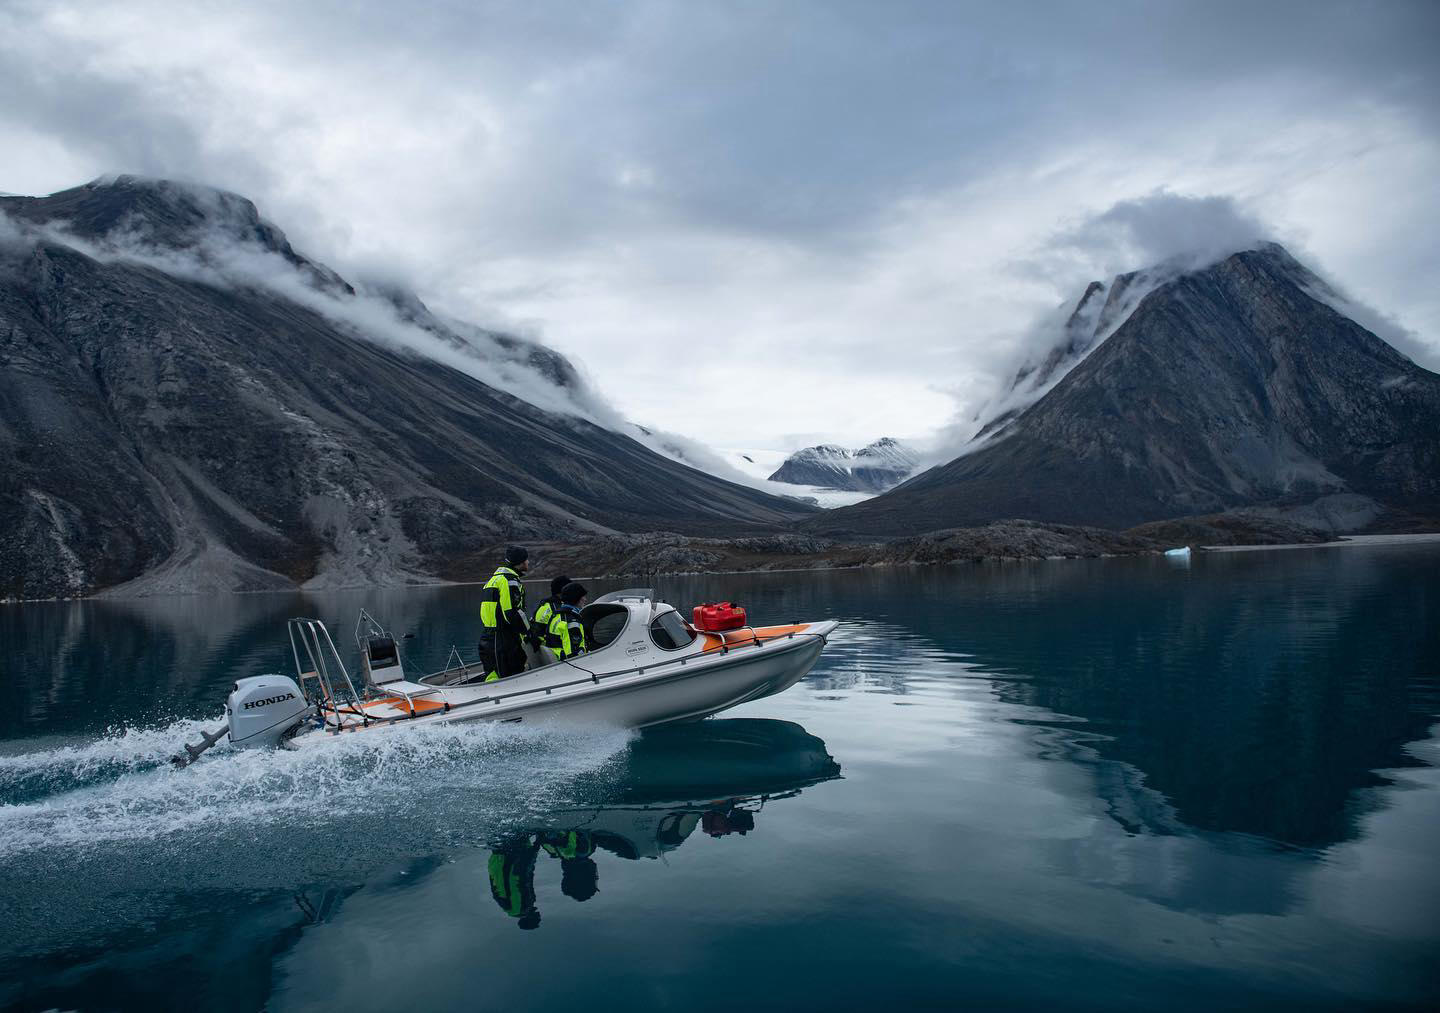 image  1 Jeff Kerby - It can take a few hours to reach Rohss Fjord from Ella Ø in these Mopa Expedition boats